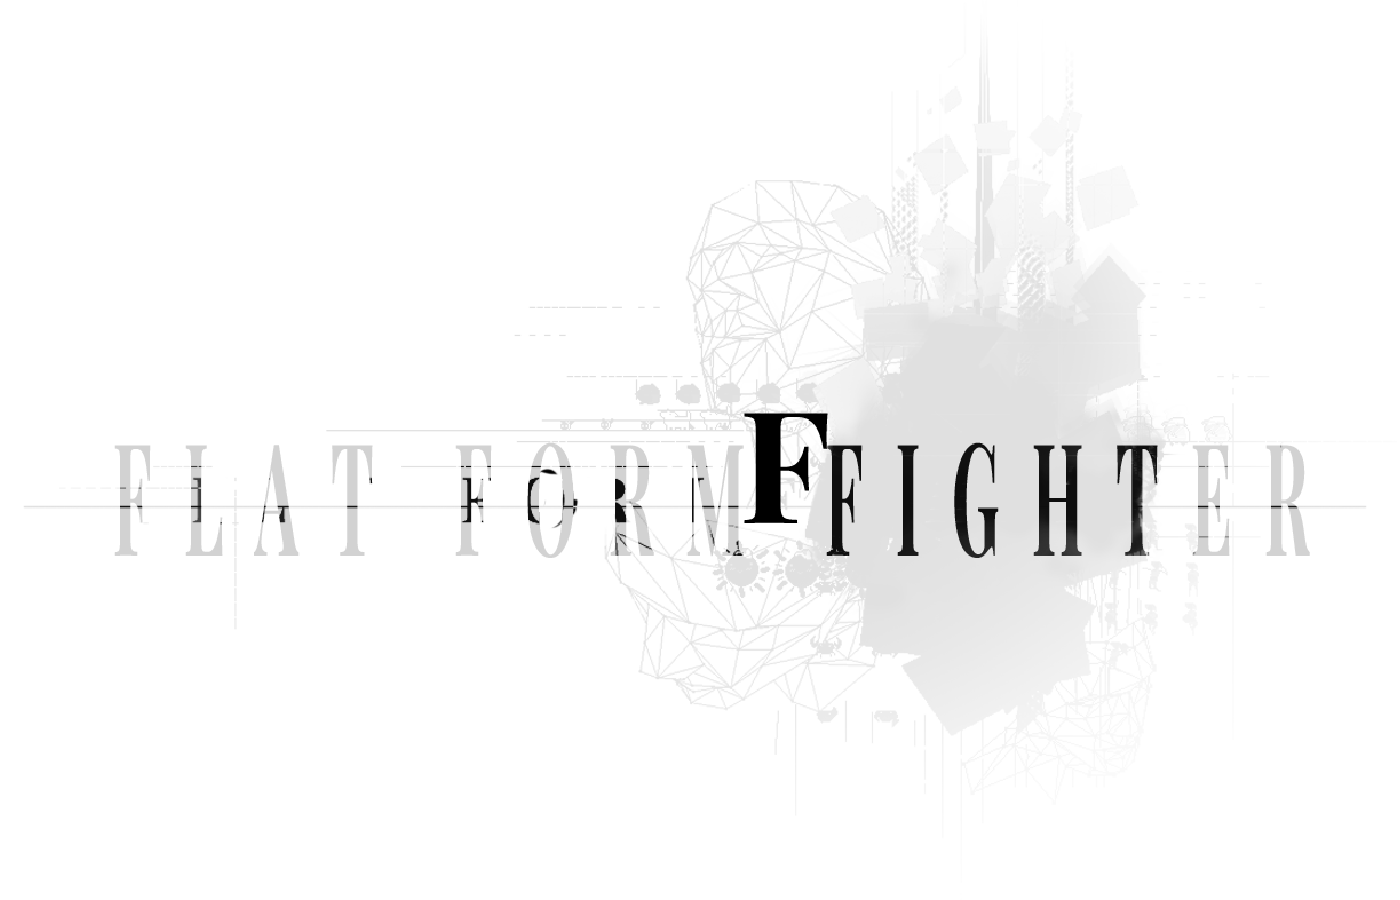 FLAT FORM FIGHTER